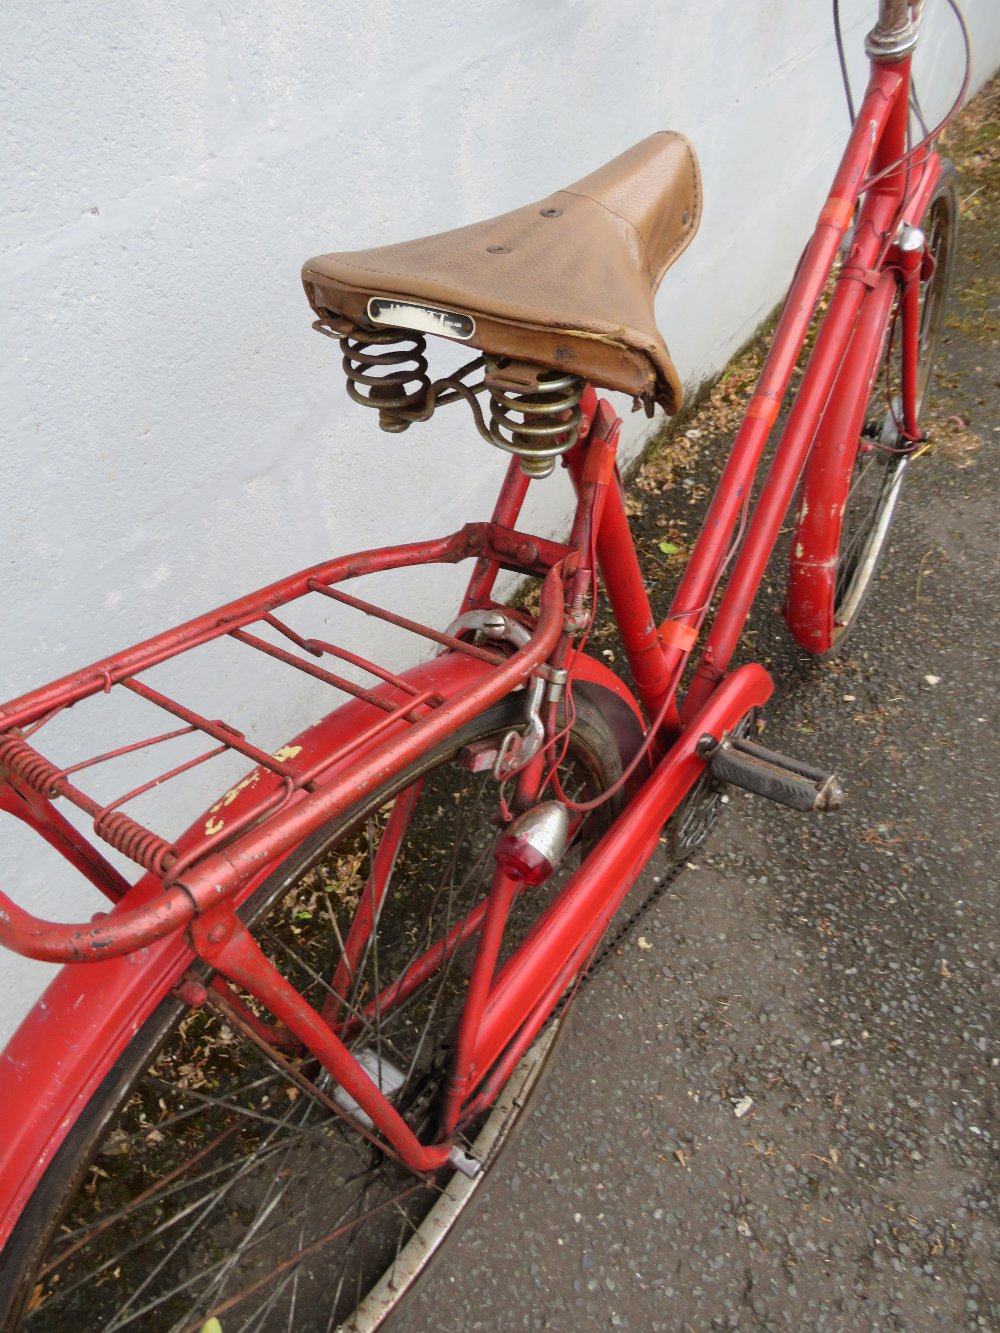 A VINTAGE 1950s THREE SPEED TRIUMPH LADIES BICYCLE PAINTED RED - Image 8 of 8